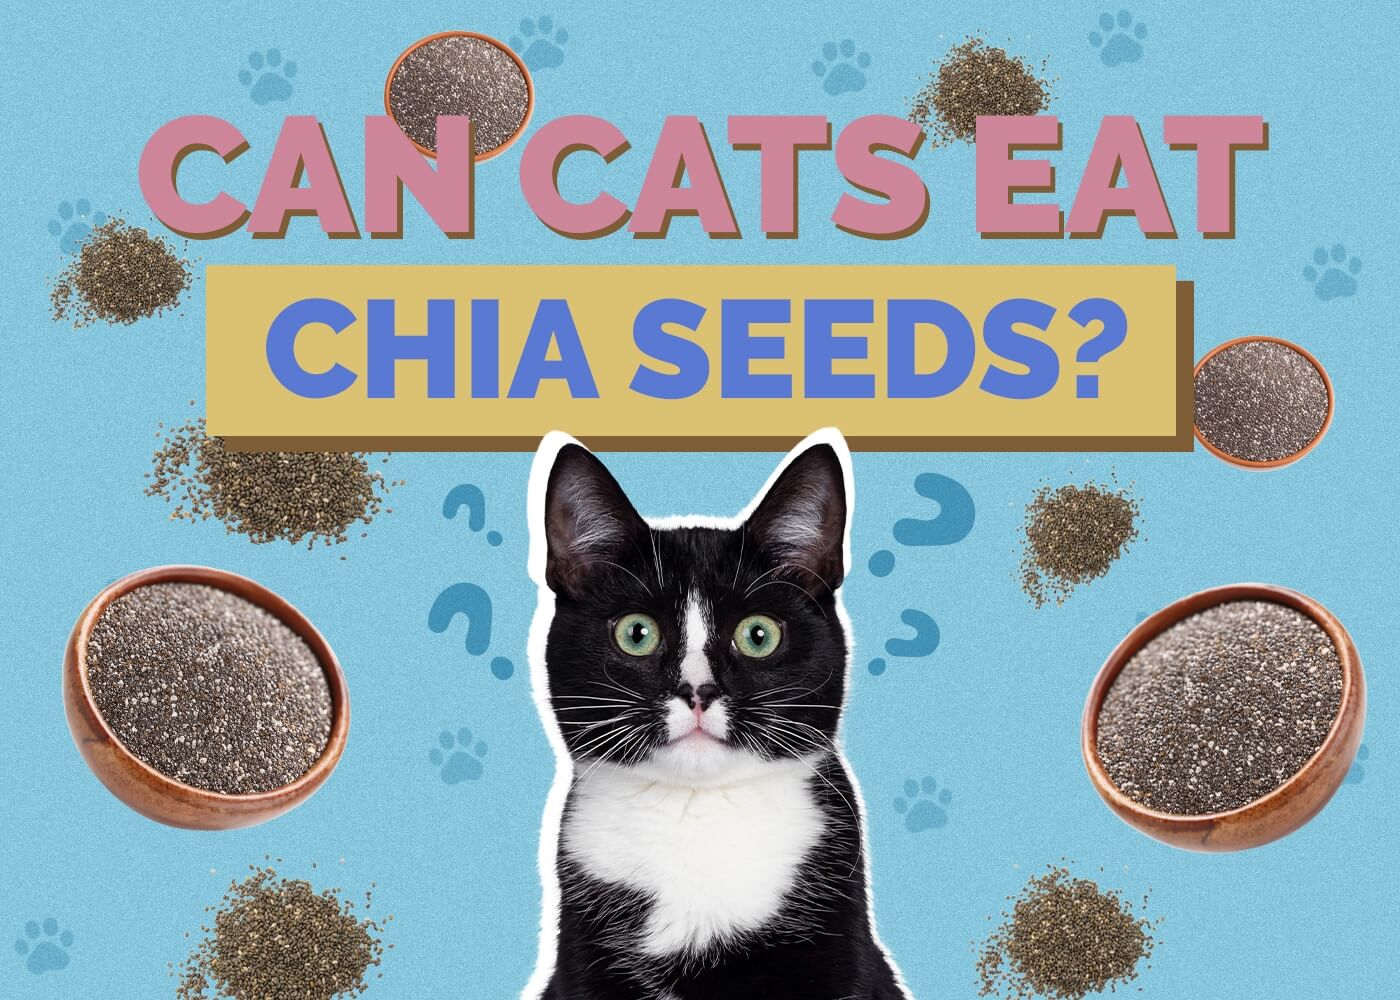 Can Cats Eat Chia Seeds